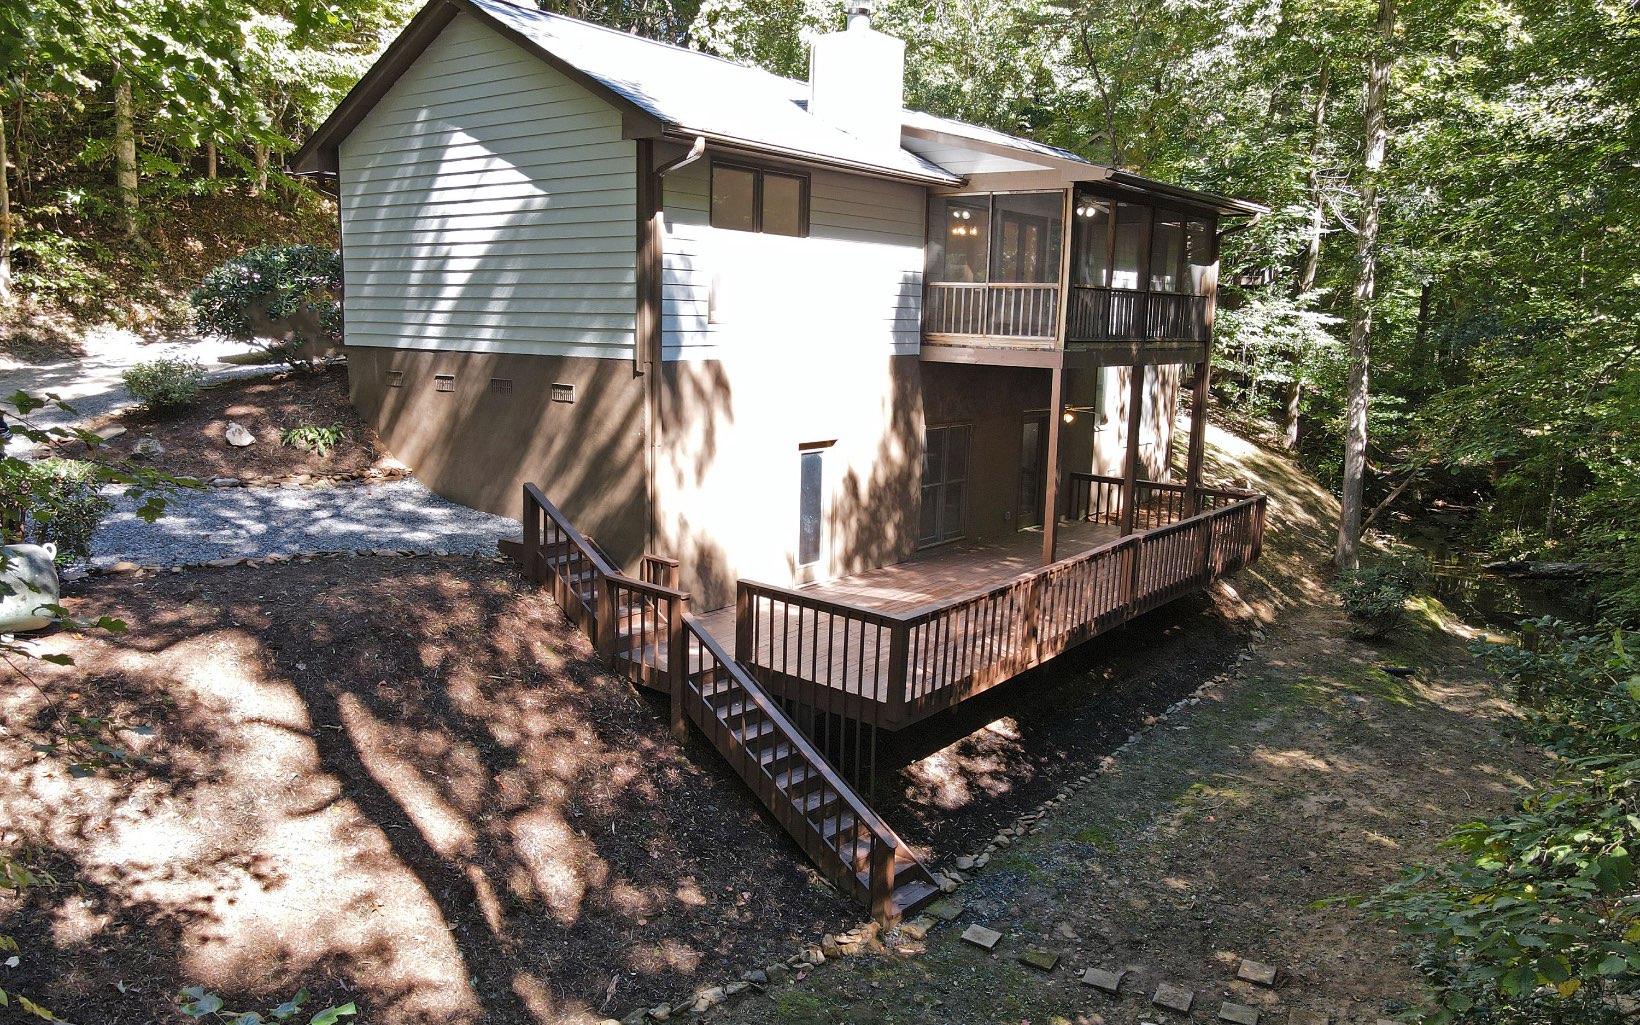 "Can't Build this Close to the Creek Anymore!" Newly Renovated Creek-Front Cottage! 2 Bedroom, 2.5 Baths + Additional Bunk Room and Full Finished Basement for Additional Living Space + HUGE Party Deck Overlooking the Creek & Wooded Setting. The Perfect Space to Entertain your Family & Friends! One Level Living with 2 Beds, 2 Baths on the Main Floor + Laundry Room. Granite in the Kitchen, Vaulted Ceilings with Wood Beams and 'Rocked' Wood Burning Fireplace in the Great Room with Access to the Screened Porch to Enjoy your Morning Coffee! Lots of Potential with this Unrestricted Lot. Don't worry about Living so close to the Creek, it is NOT in a Flood Plain. Fabulous Location: Close to Crane Creek Vineyards, Young Harris College, Brasstown Valley Resort & Spa for Dinner, Drinks, 18 Hole Championship Golf Course & a Relaxing Day at EQuani Spa!